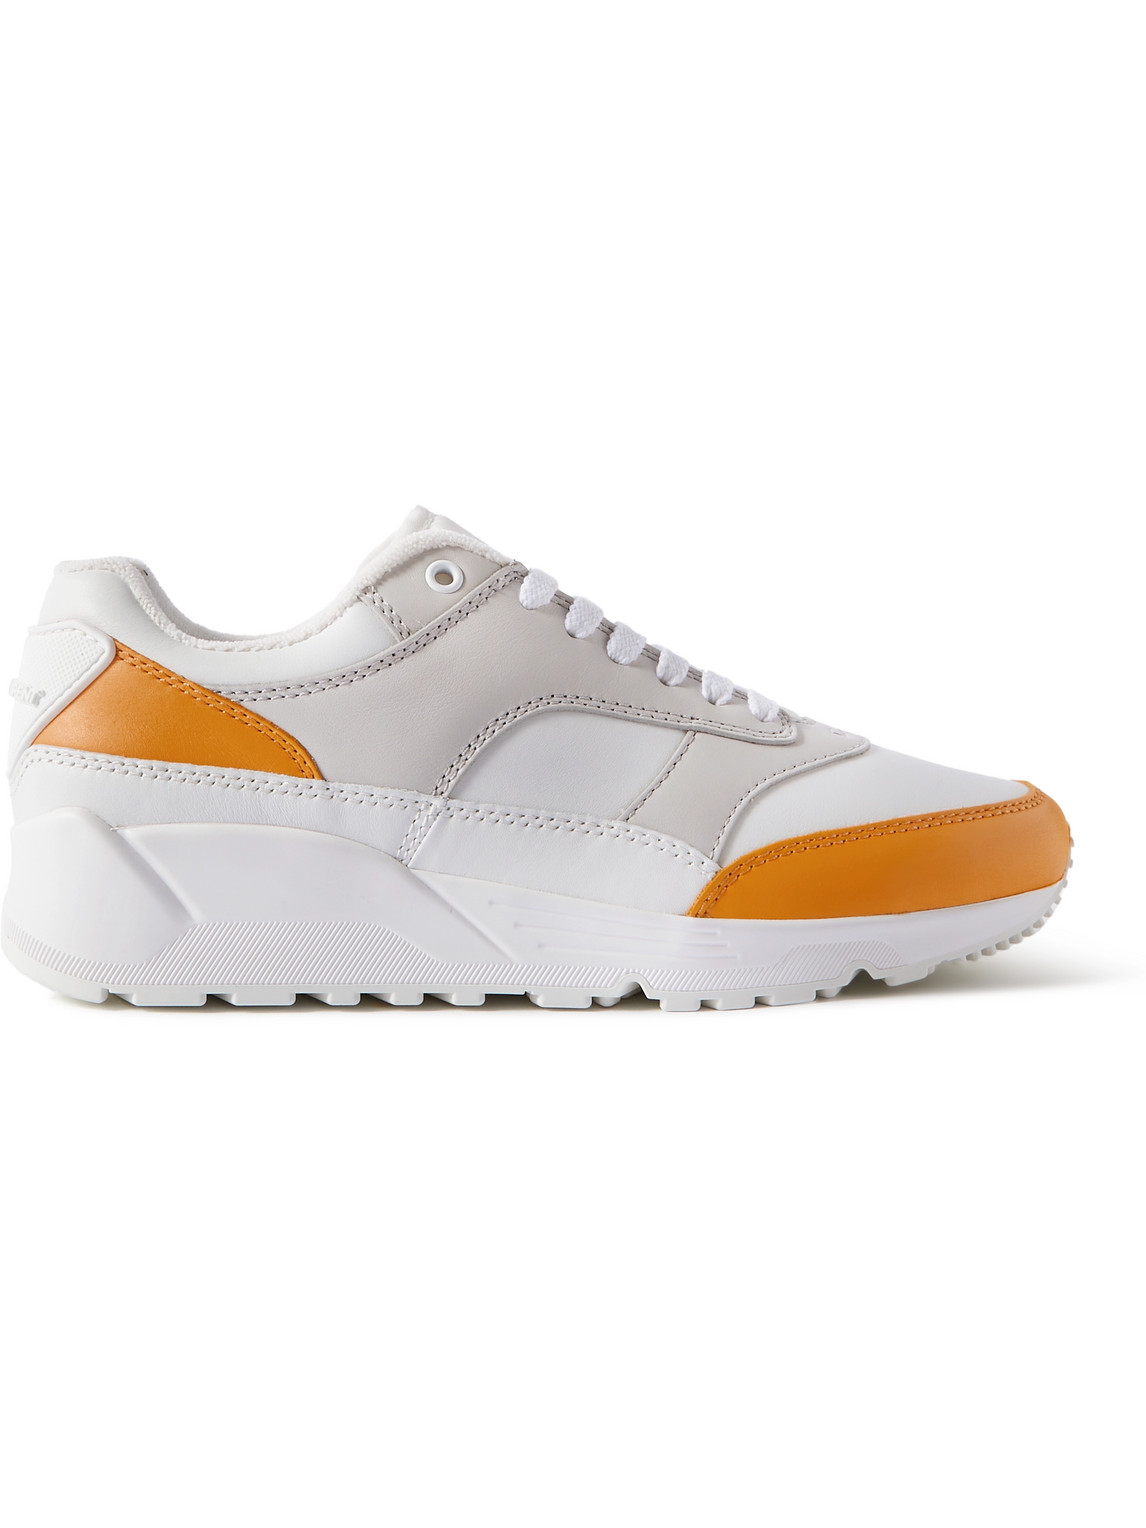 Saint Laurent Colour-block Leather Low-top Trainers In Yellow